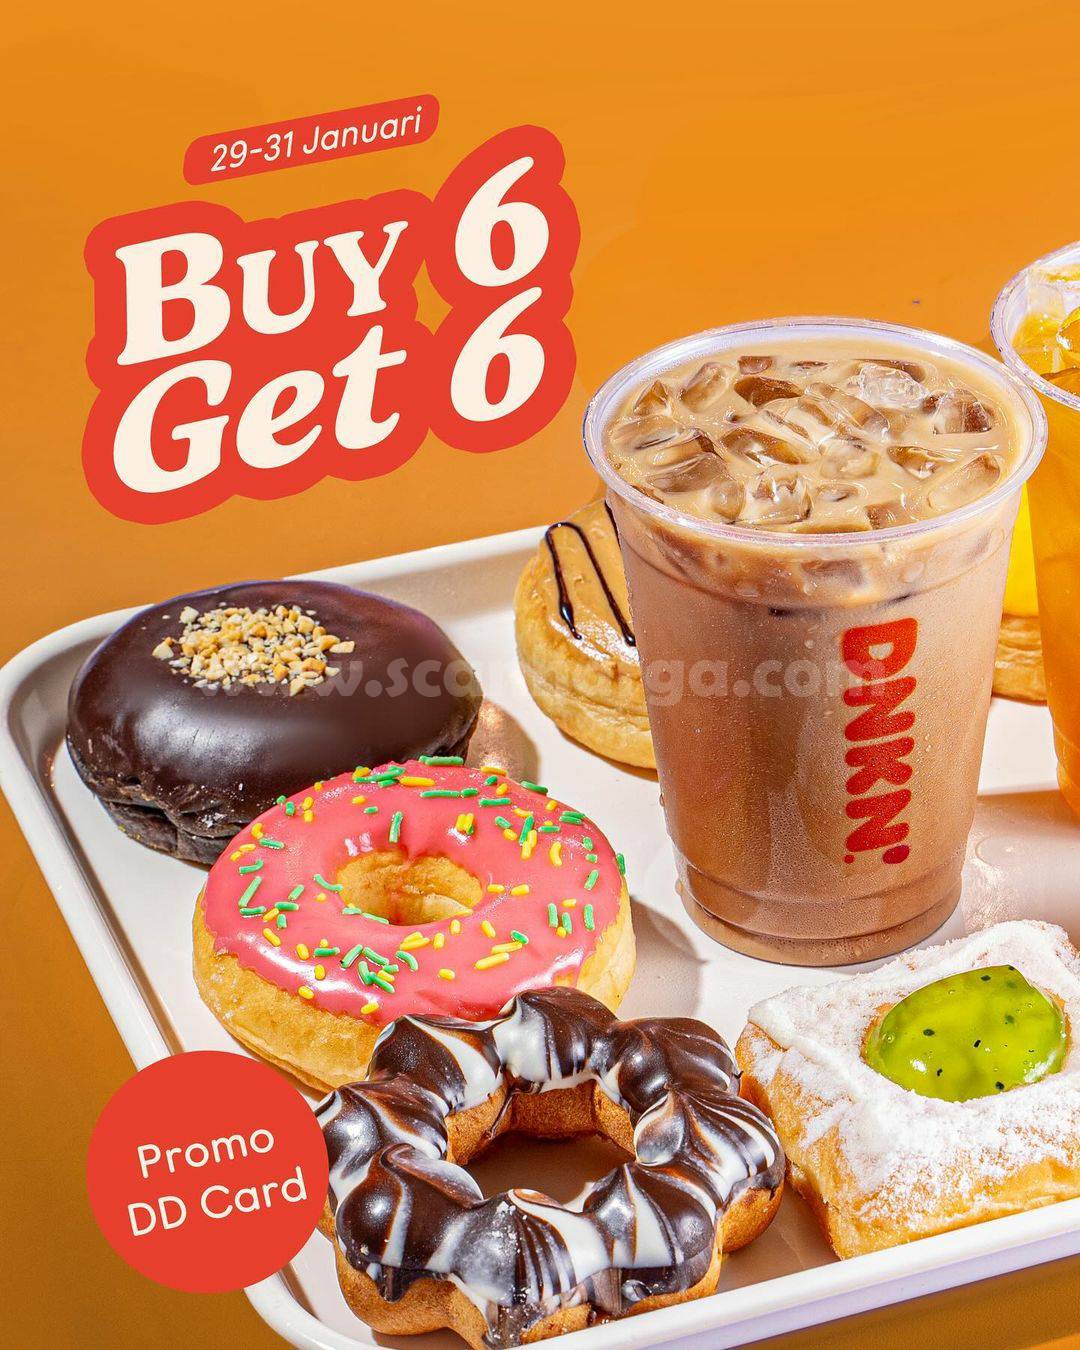 DUNKIN DONUTS Promo PAYDAY DD Card - BUY 6 GET 6